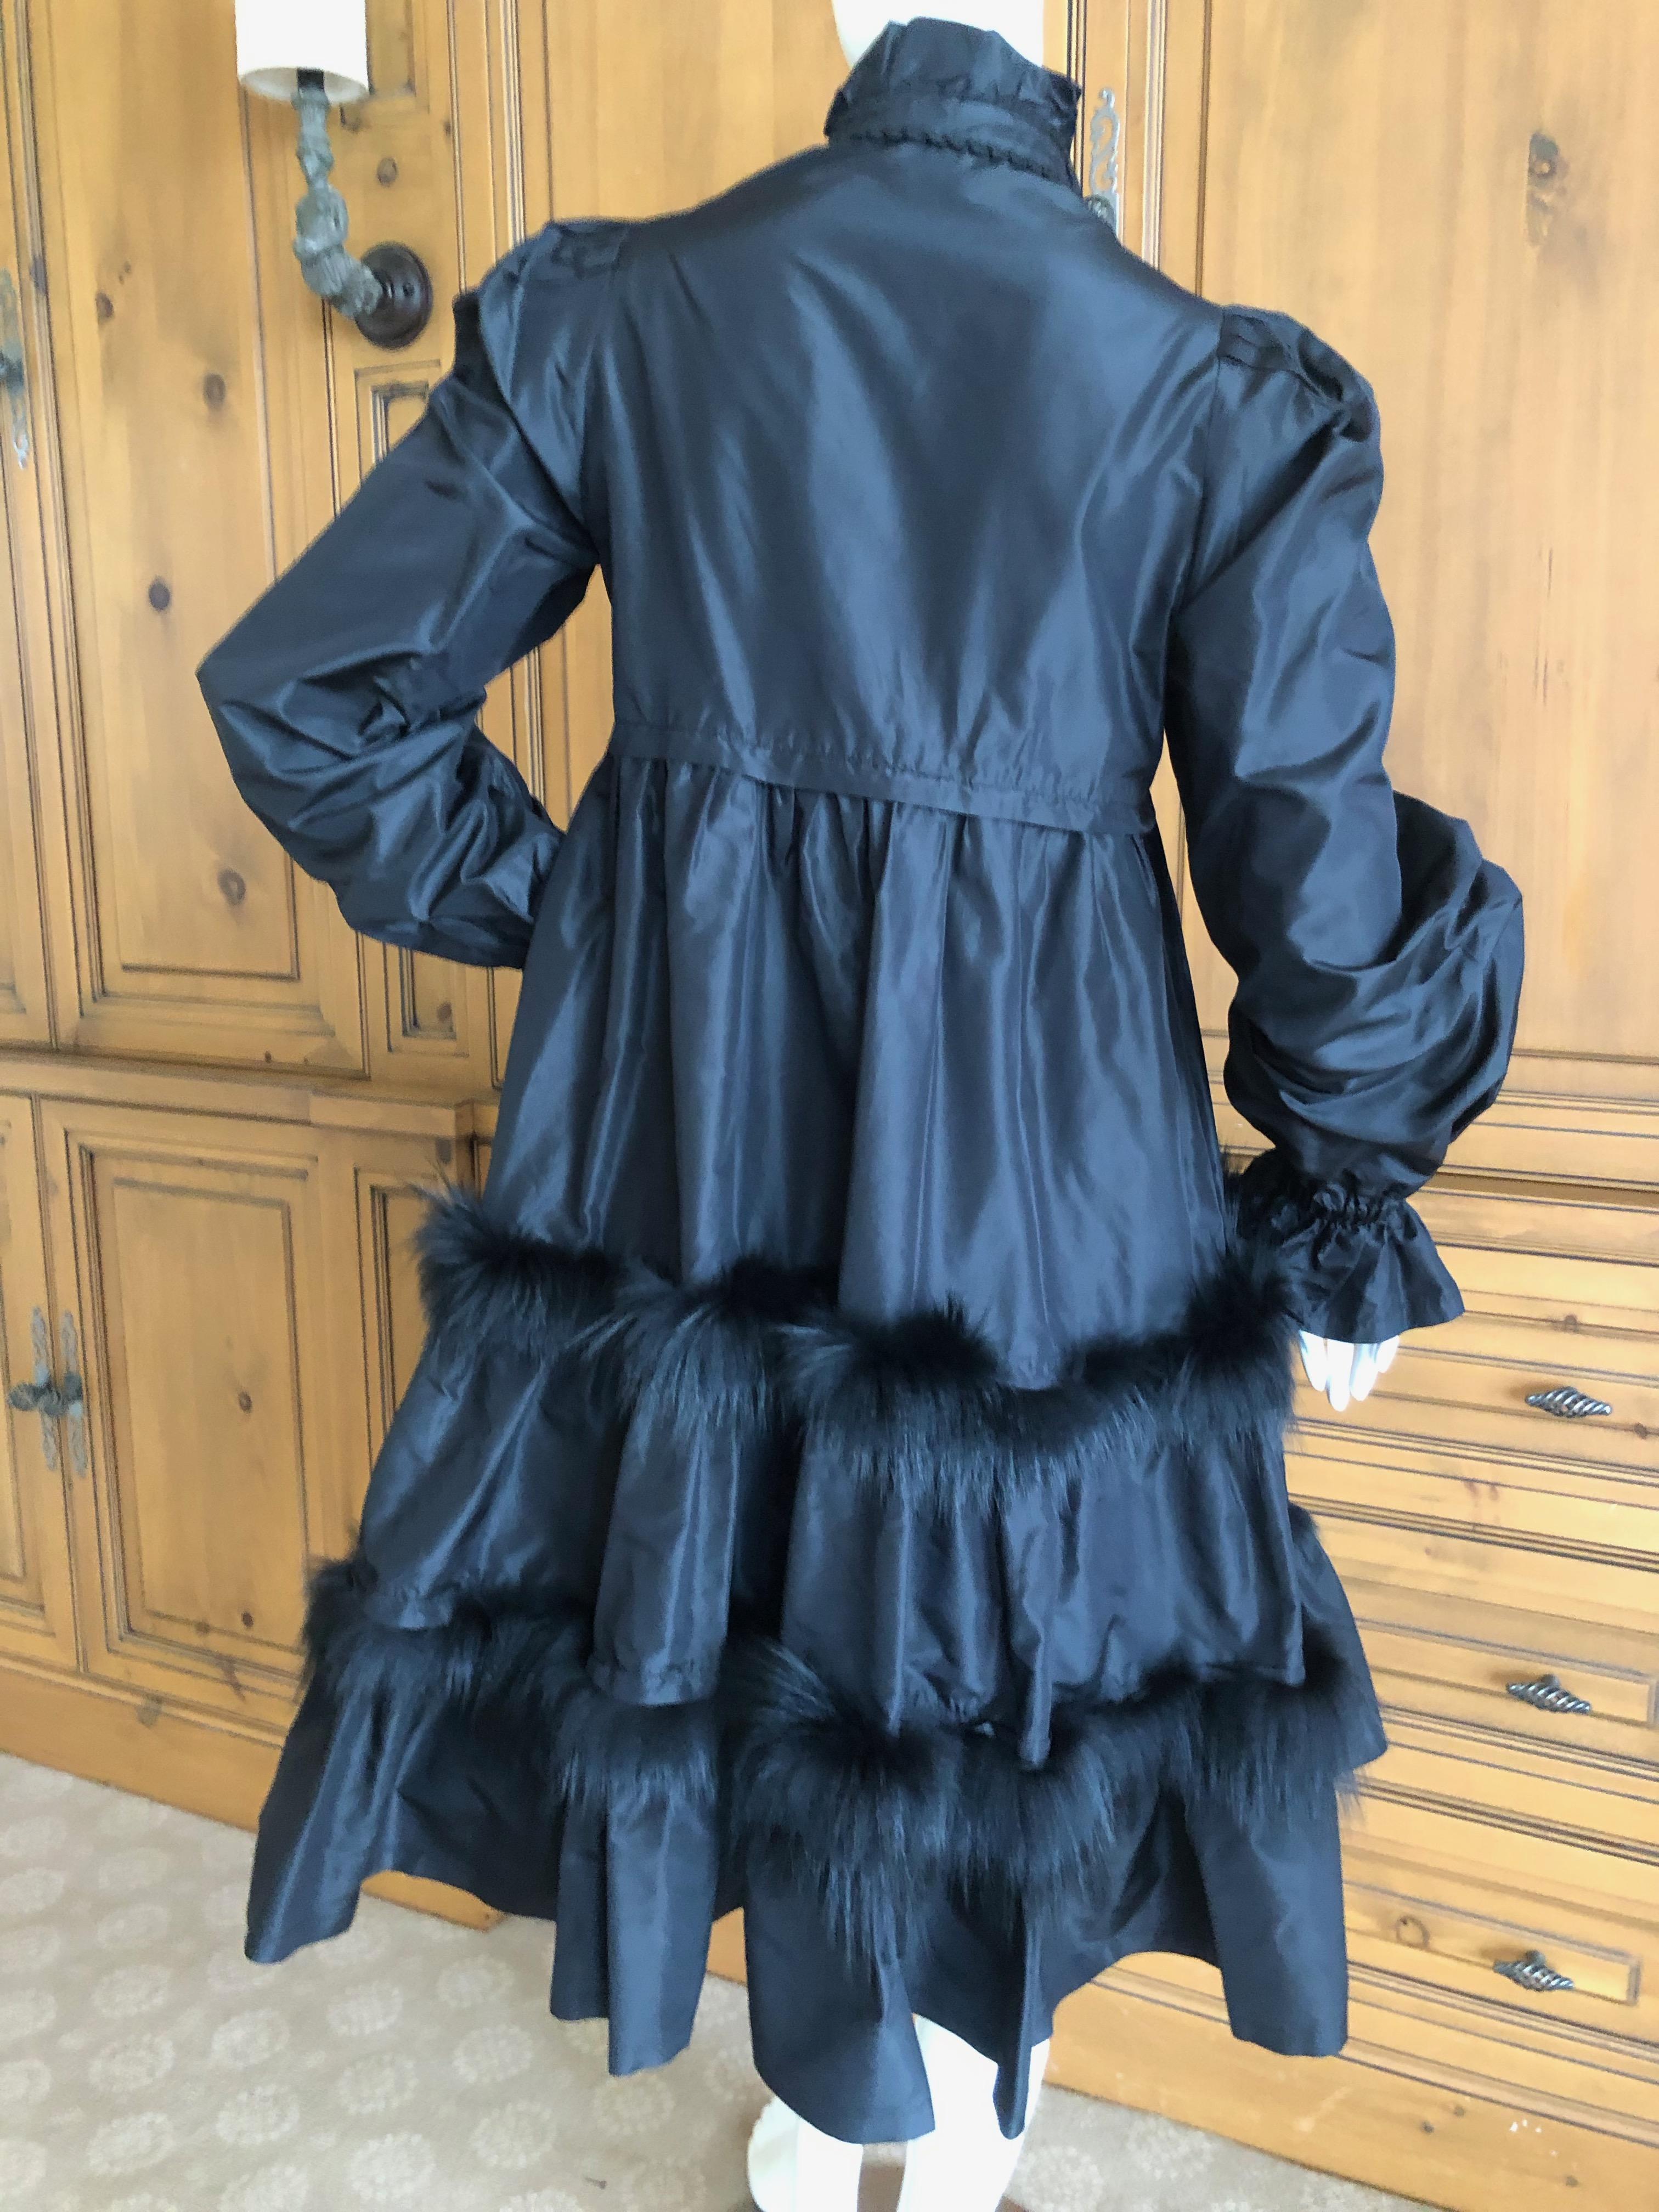 Moschino Vintage Black Silk Taffeta Empire Ball Dress with Fur Trim.
Miles of fabric, the skirt is a full circle.
 Size 8
Bust 36